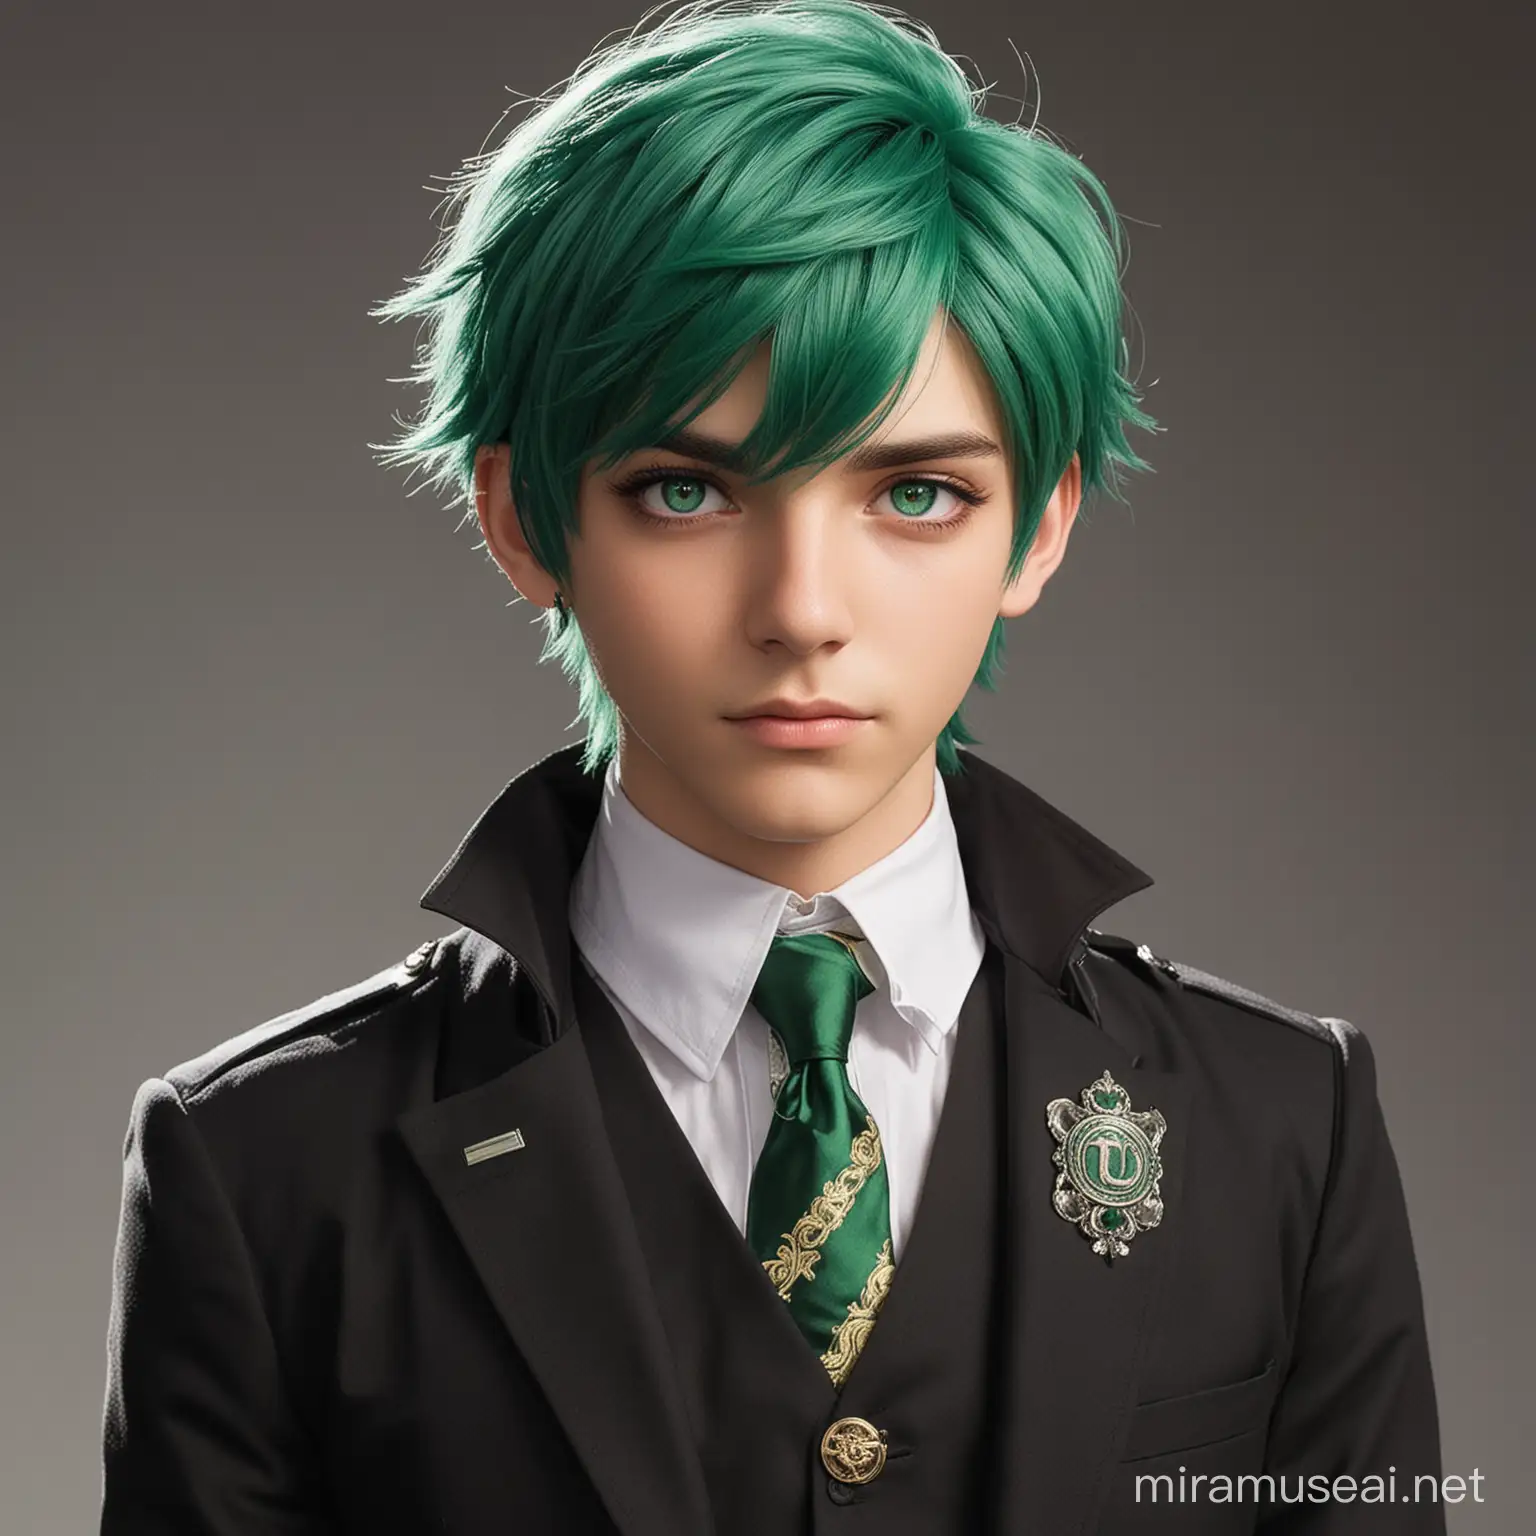 A Green Haired Male who has Emerald colored eyes and looks like 21 years old, wears an outfit that is similar to magic academy students with the color of Black and Green.